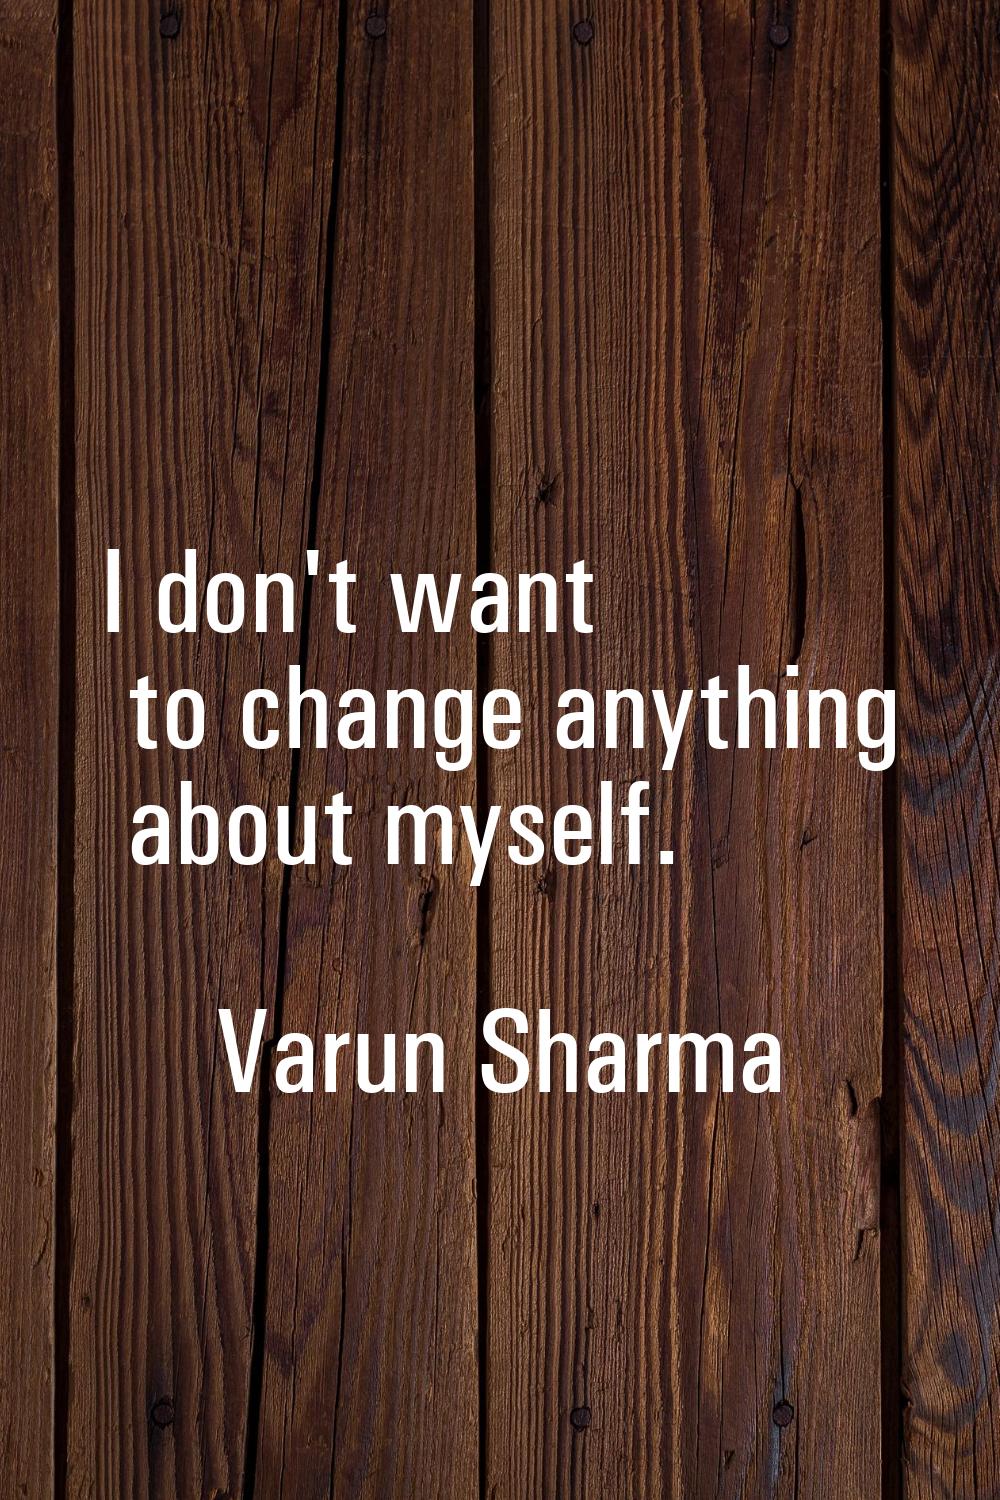 I don't want to change anything about myself.